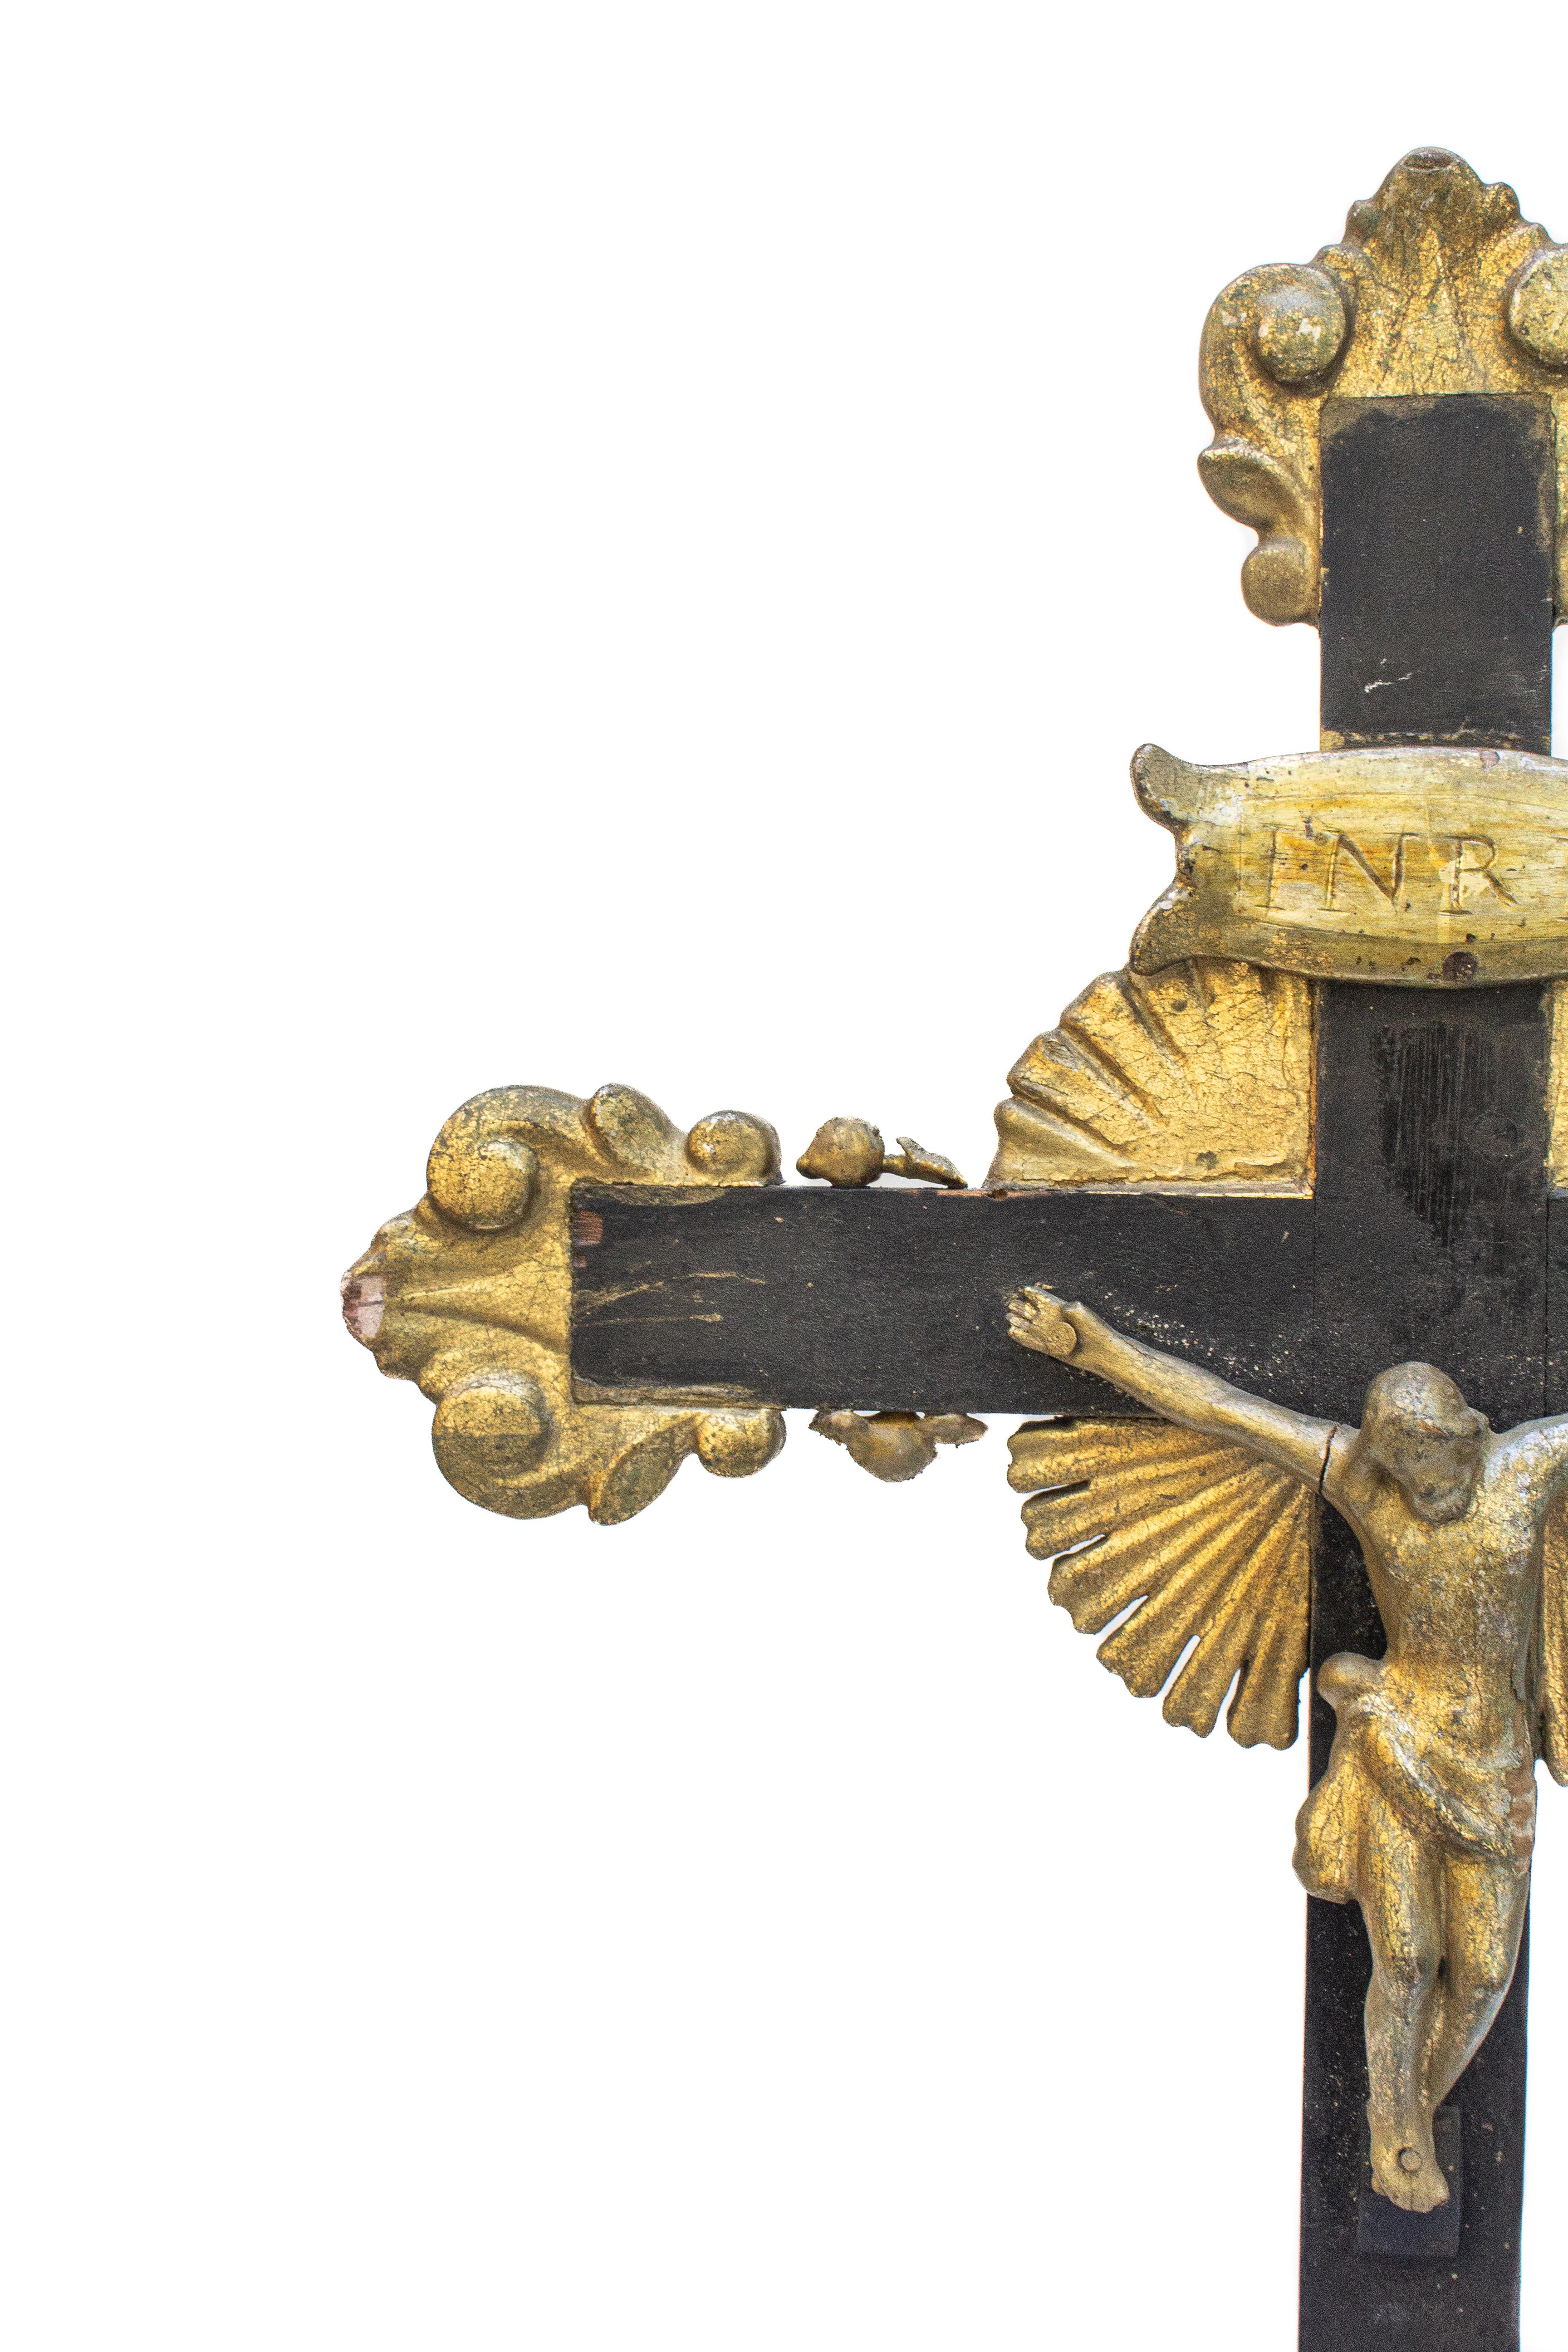 18th century Italian black crucifix with a gold figure of Christ. It is adorned with baroque pearls and mounted on a piece of bornite with chalcopyrite. The gold figure of Christ coordinates with the gold baroque pearls.

The piece is put together